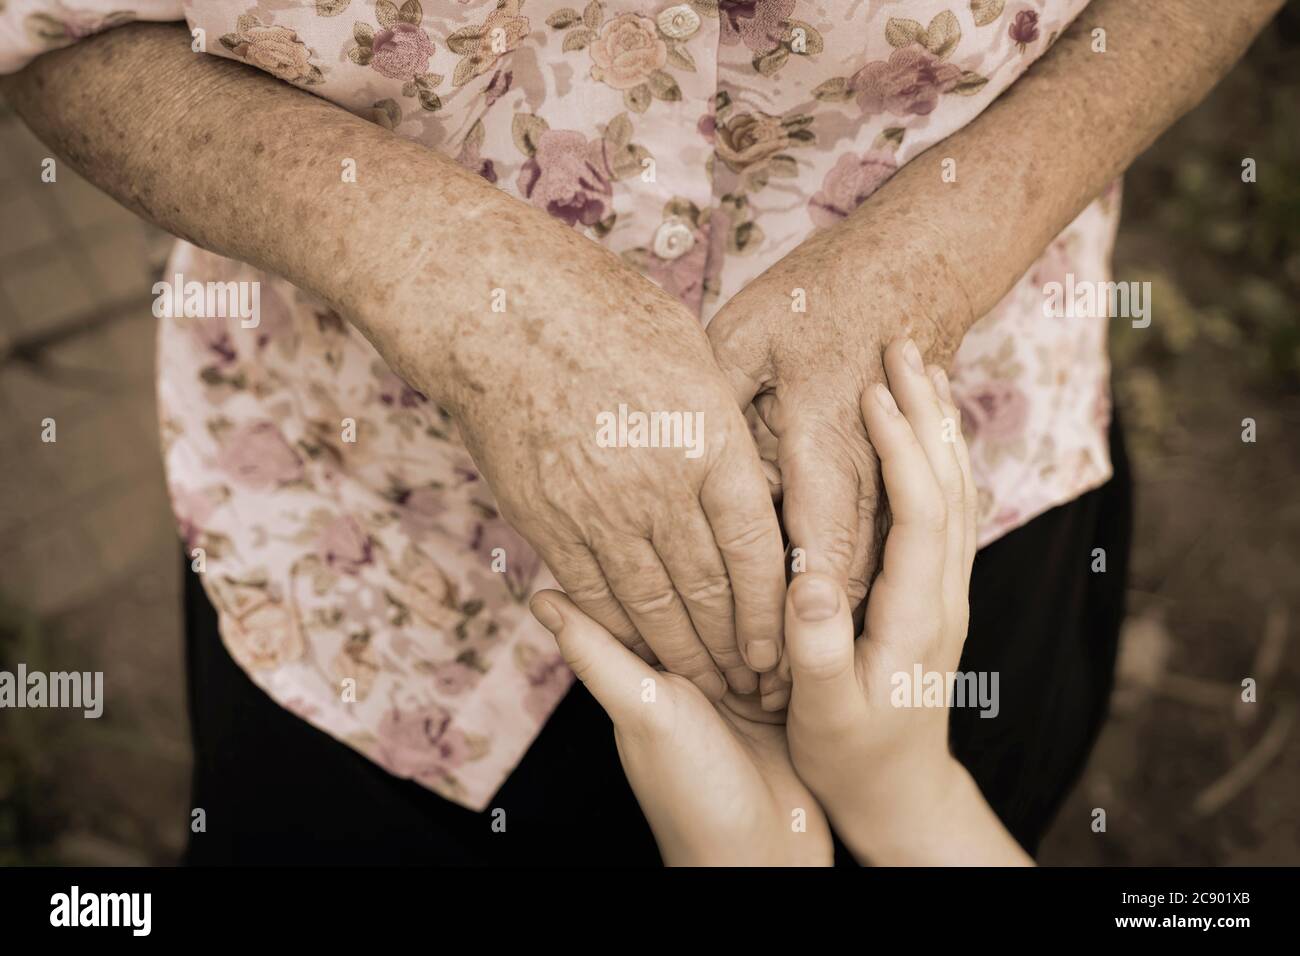 Holding wrinkled hands of an elderly woman and young hands of a teenager, concept of age, family, care and support for family, seniors Stock Photo